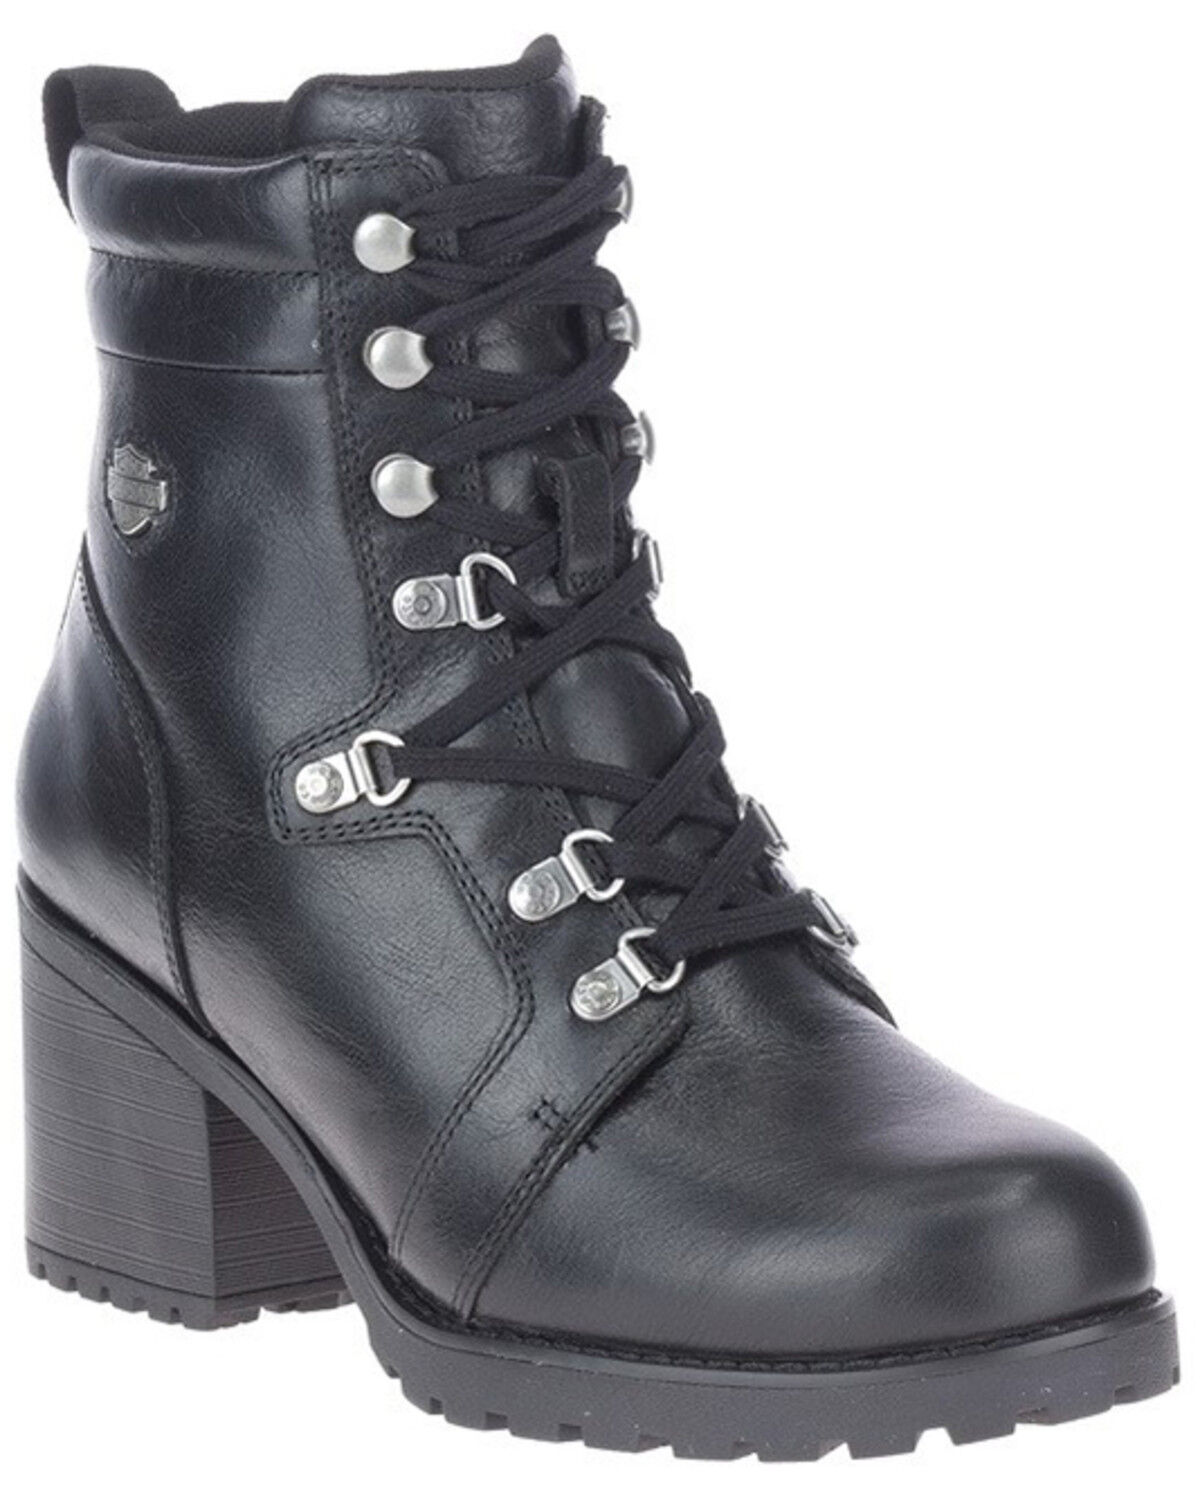 Westconnex Women Round Toe Ankle Lace Up Waterproof Boots